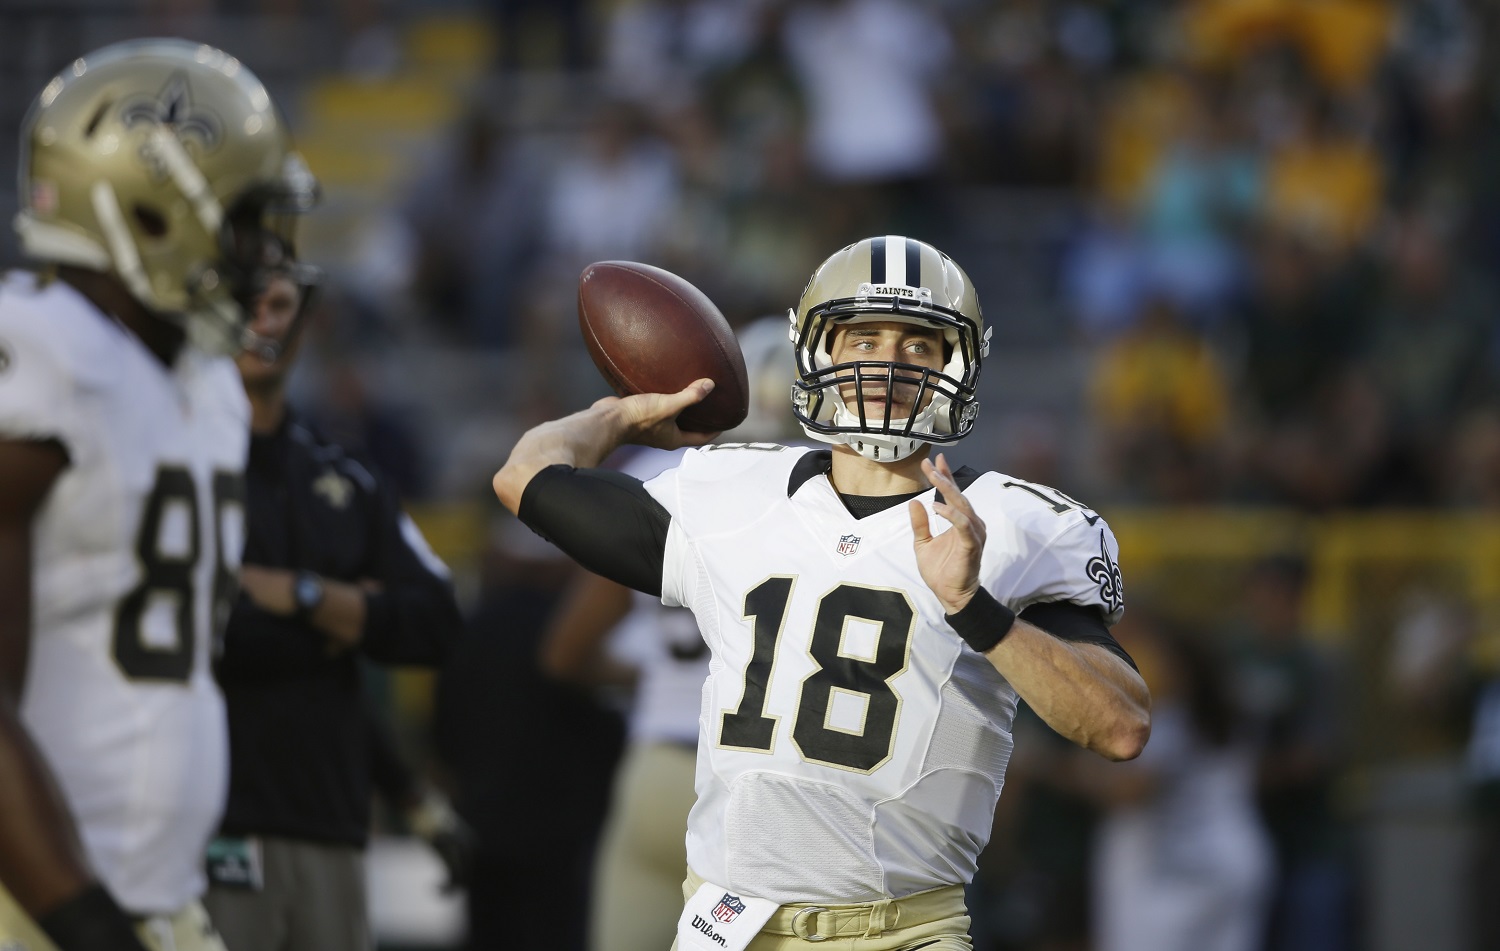 New Orleans Saints' Garrett Grayson warms up before a preseason NFL football game against the Green Bay Packers Thursday, Sept. 3, 2015, in Green Bay, Wis. (AP Photo/Jeffrey Phelps)